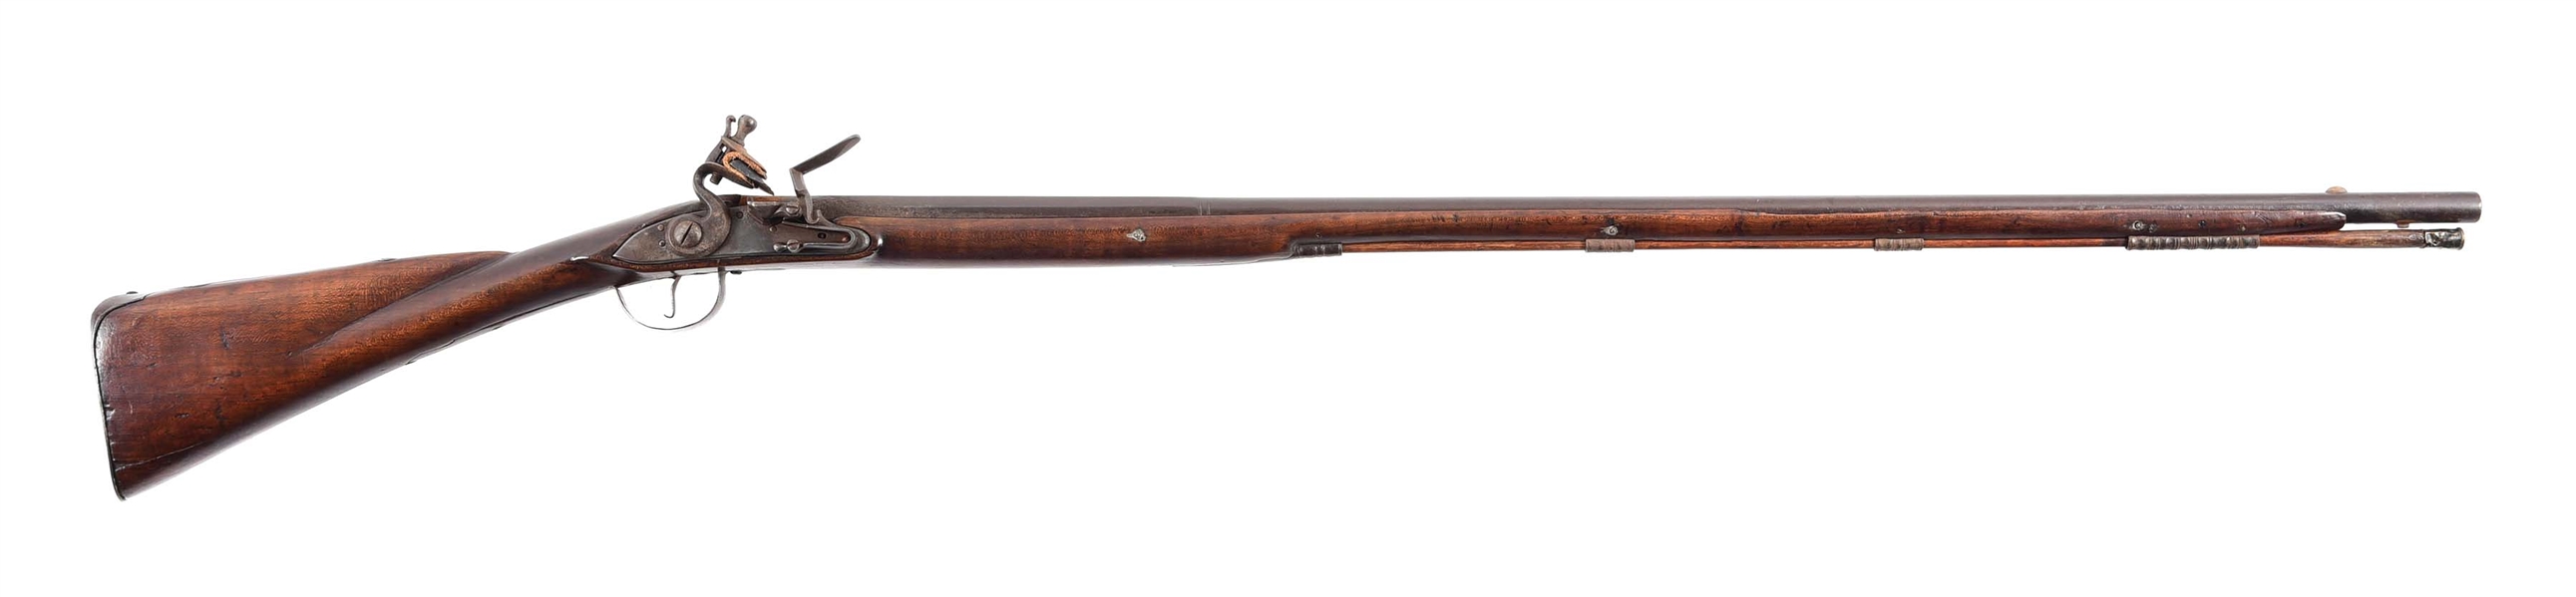 (A) AMERICAN STOCKED FLINTLOCK FUSIL WITH FRENCH PARTS.